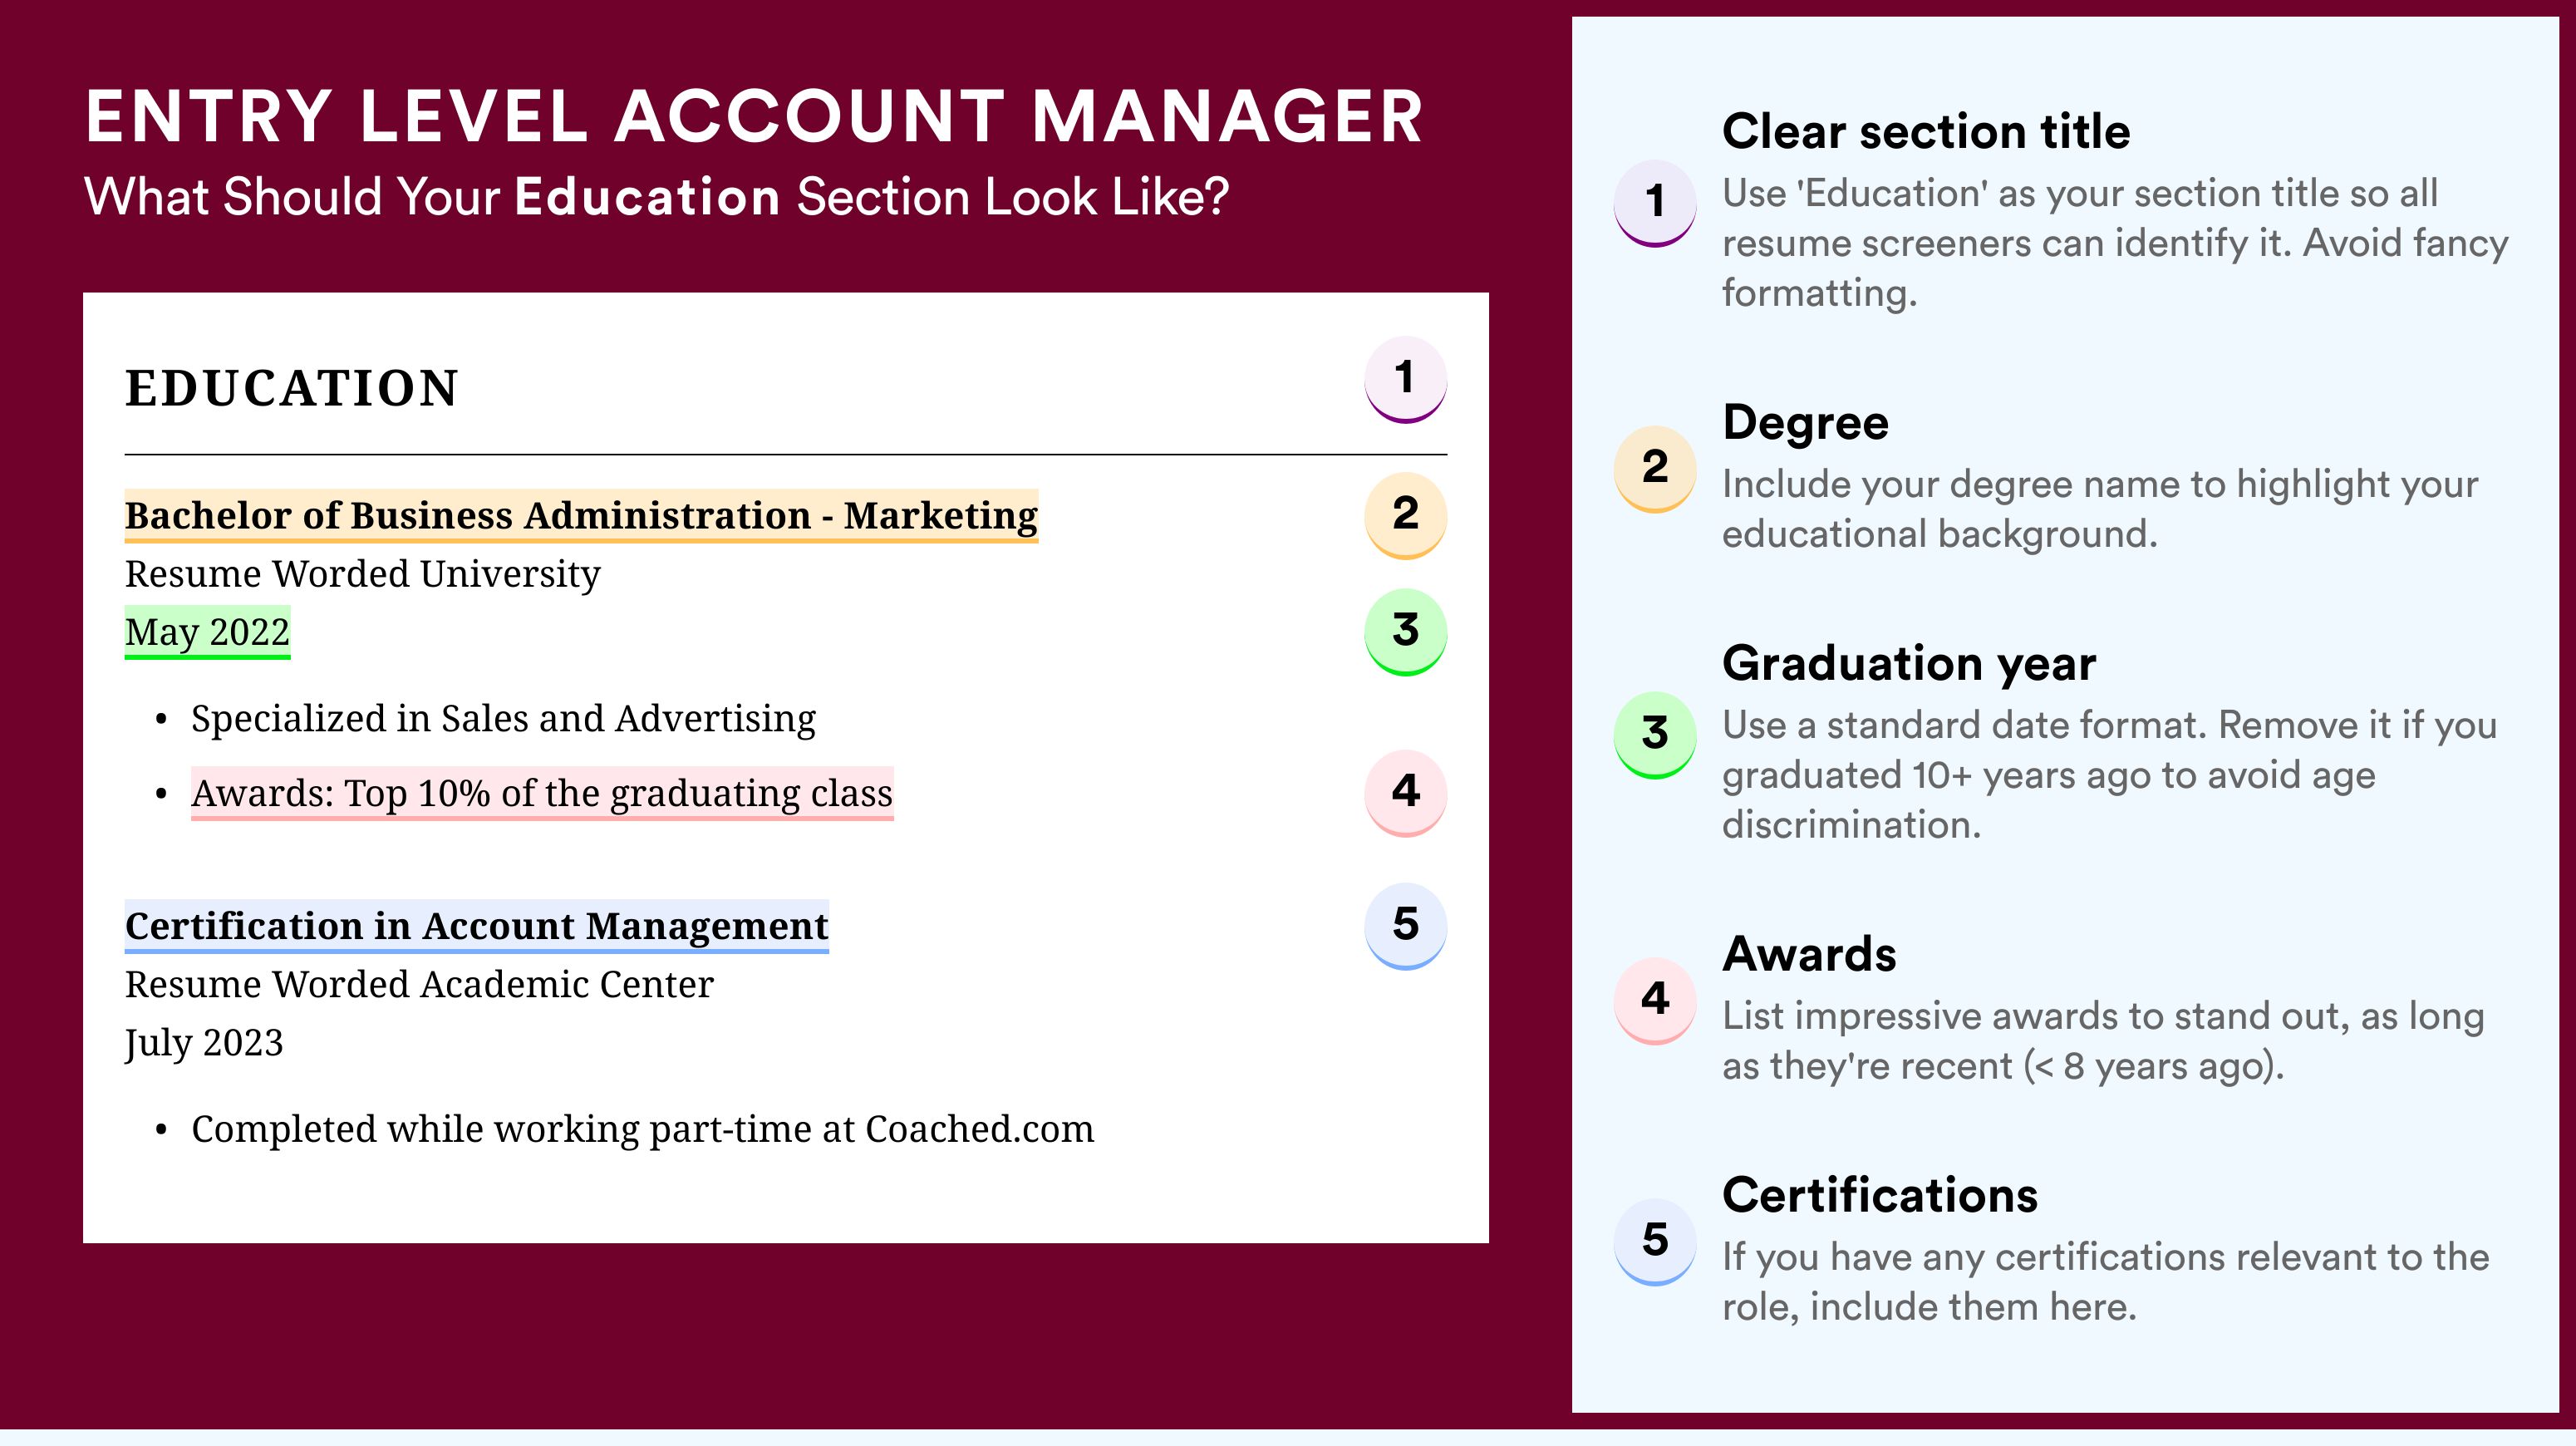 How To Write An Education Section - Entry Level Account Manager Roles